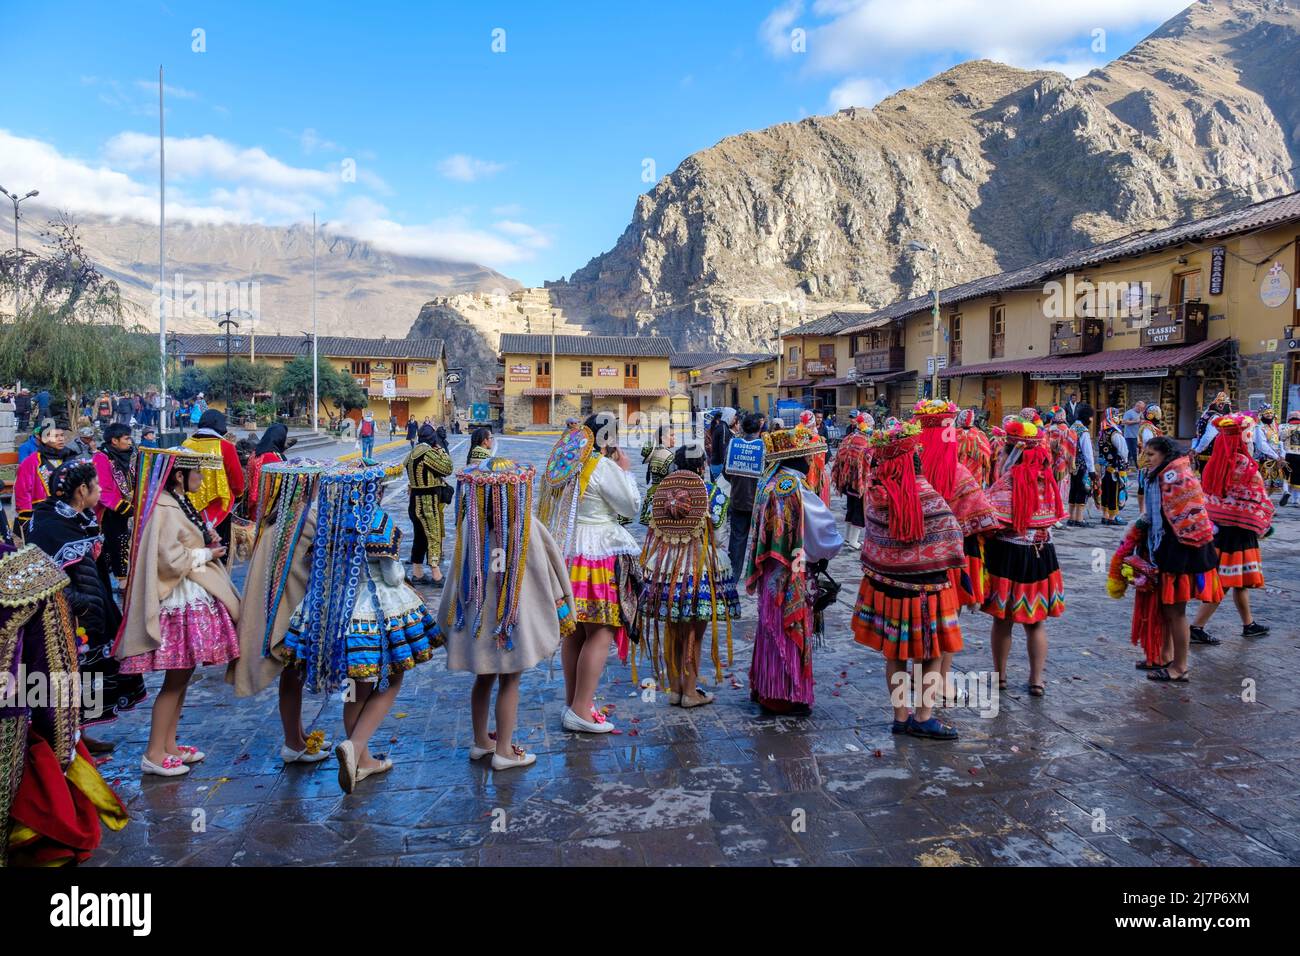 People dressed for Ollantaytambo religious festival, Plaza de Armas, mountains and fortress ruins in background, Urubamba Valley, Sacred Valley, Peru Stock Photo